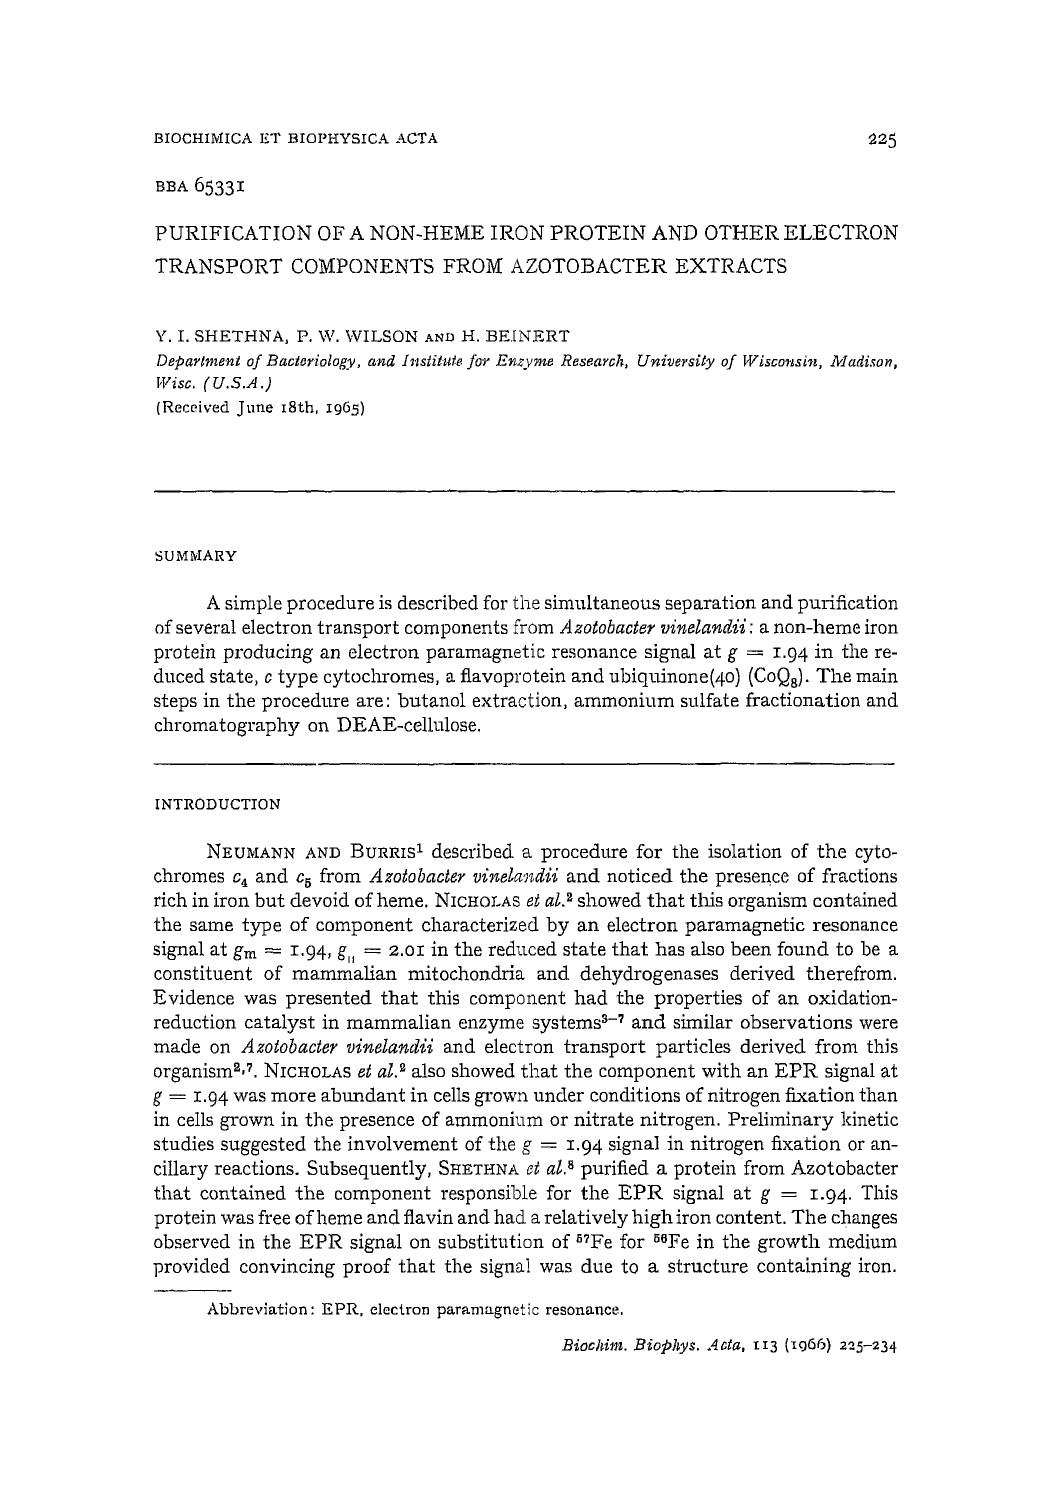 Purification of a non-heme iron protein and other electron transport components from azotobacter extracts by Y.I. Shethna; P.W. Wilson; H. Beinert